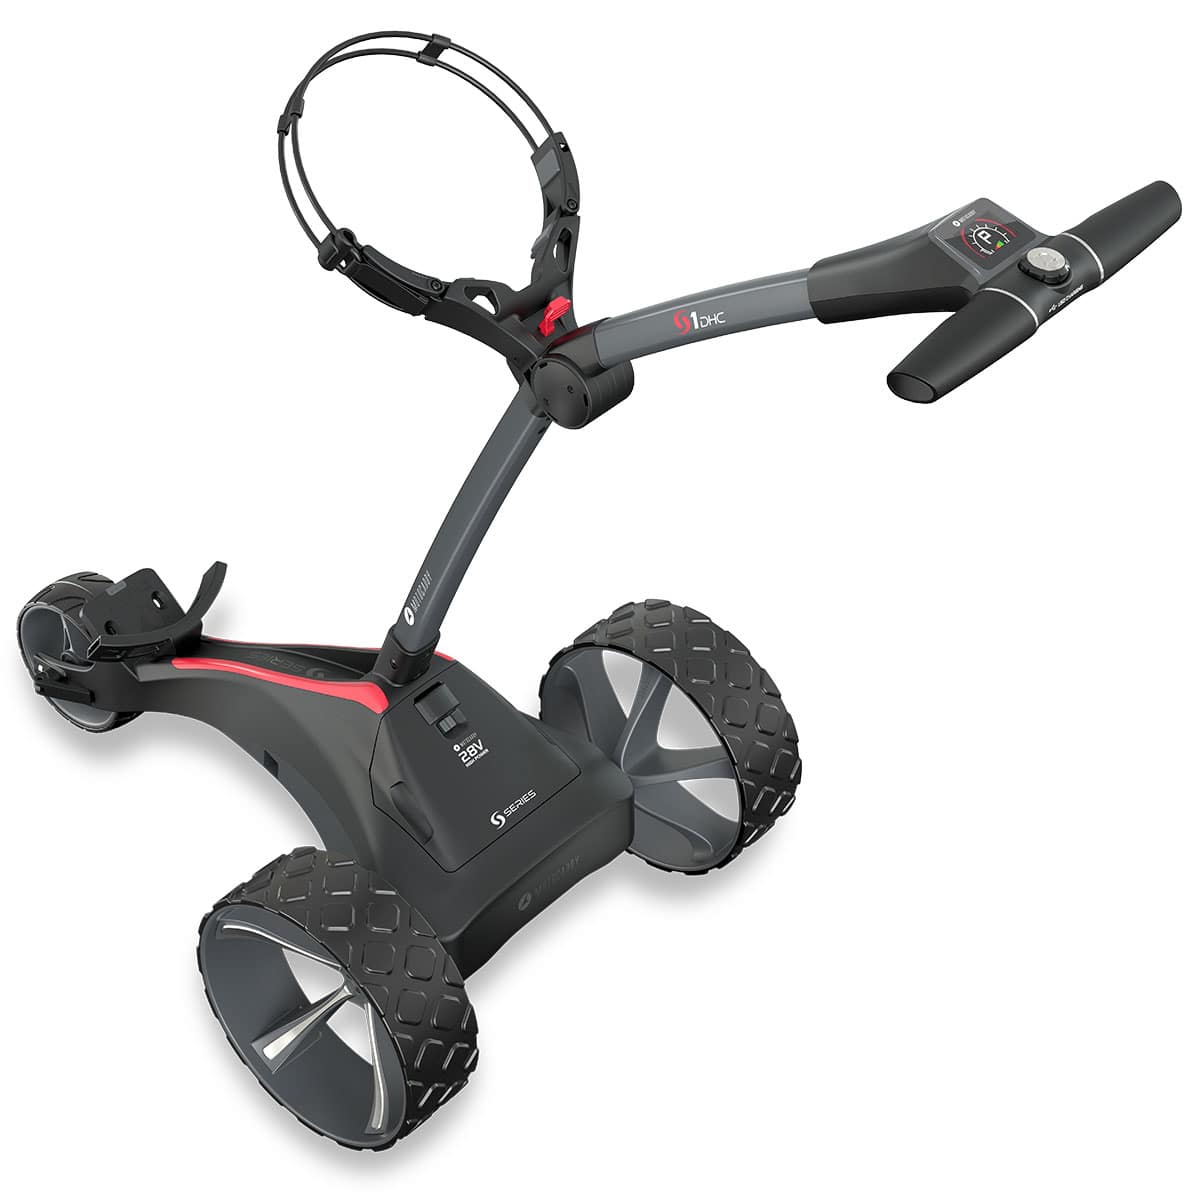 Motocaddy S1 DHC Extended Range Lithium Electric Golf Trolley